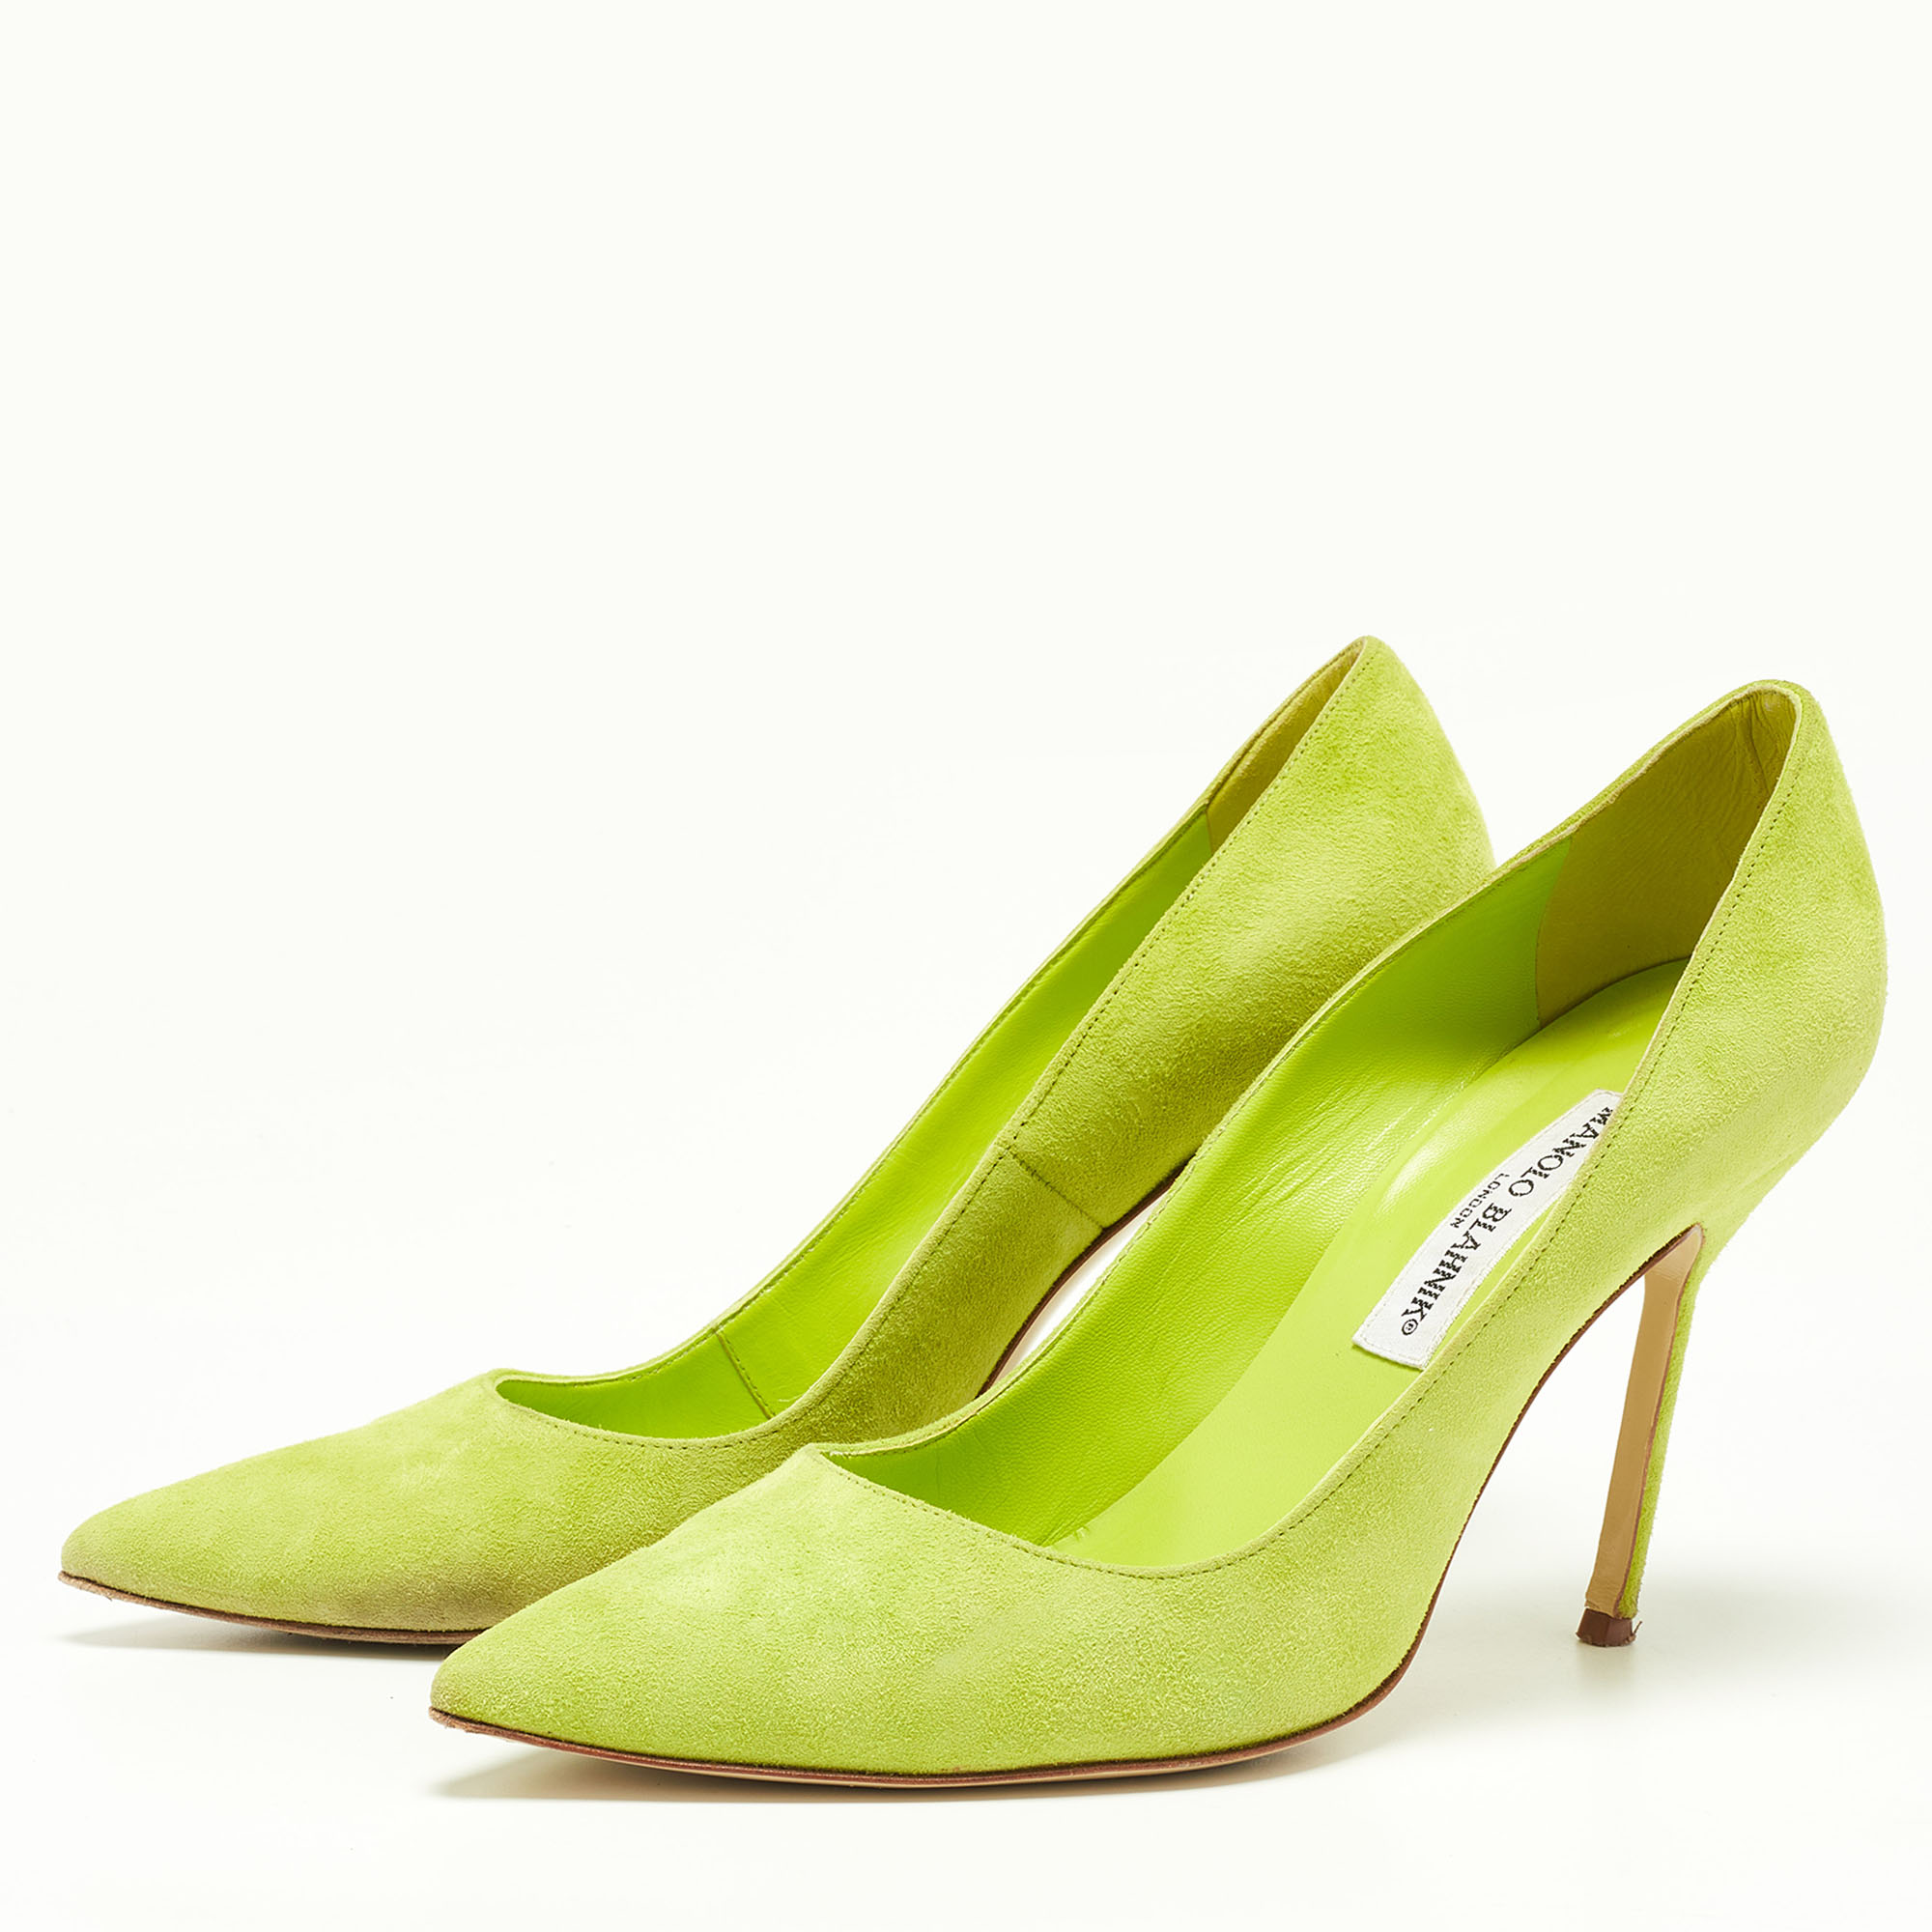  Manolo Blahnik Green Suede BB Pointed Toe Pumps Size 39